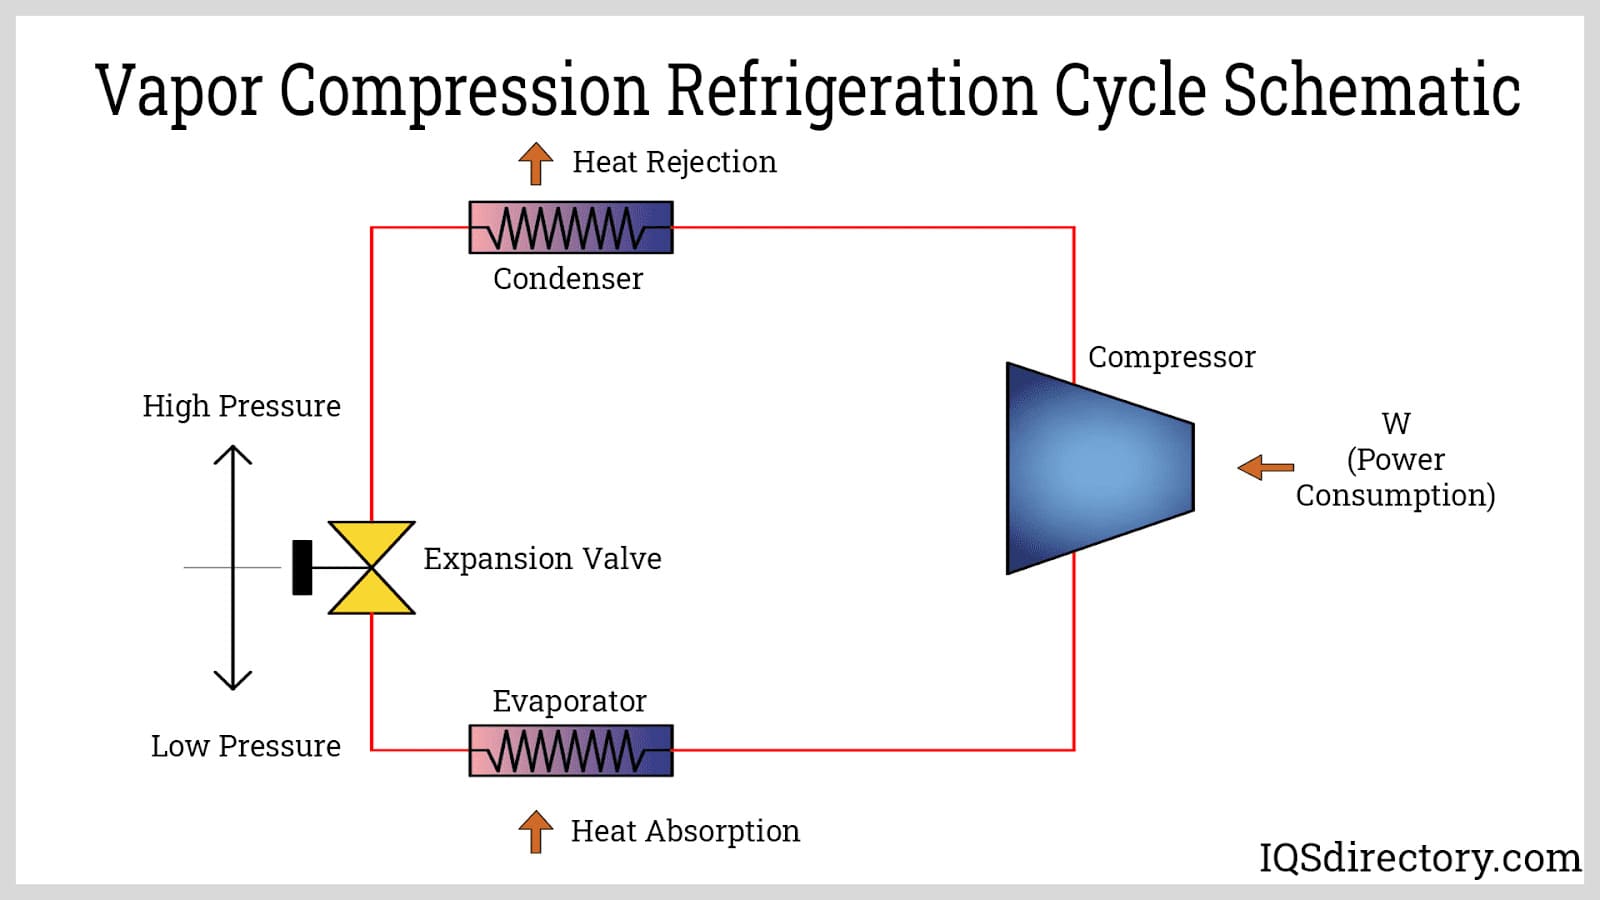 https://www.iqsdirectory.com/articles/chiller/water-chiller/vapor-compression-refigeration-cycle-schematic.jpg